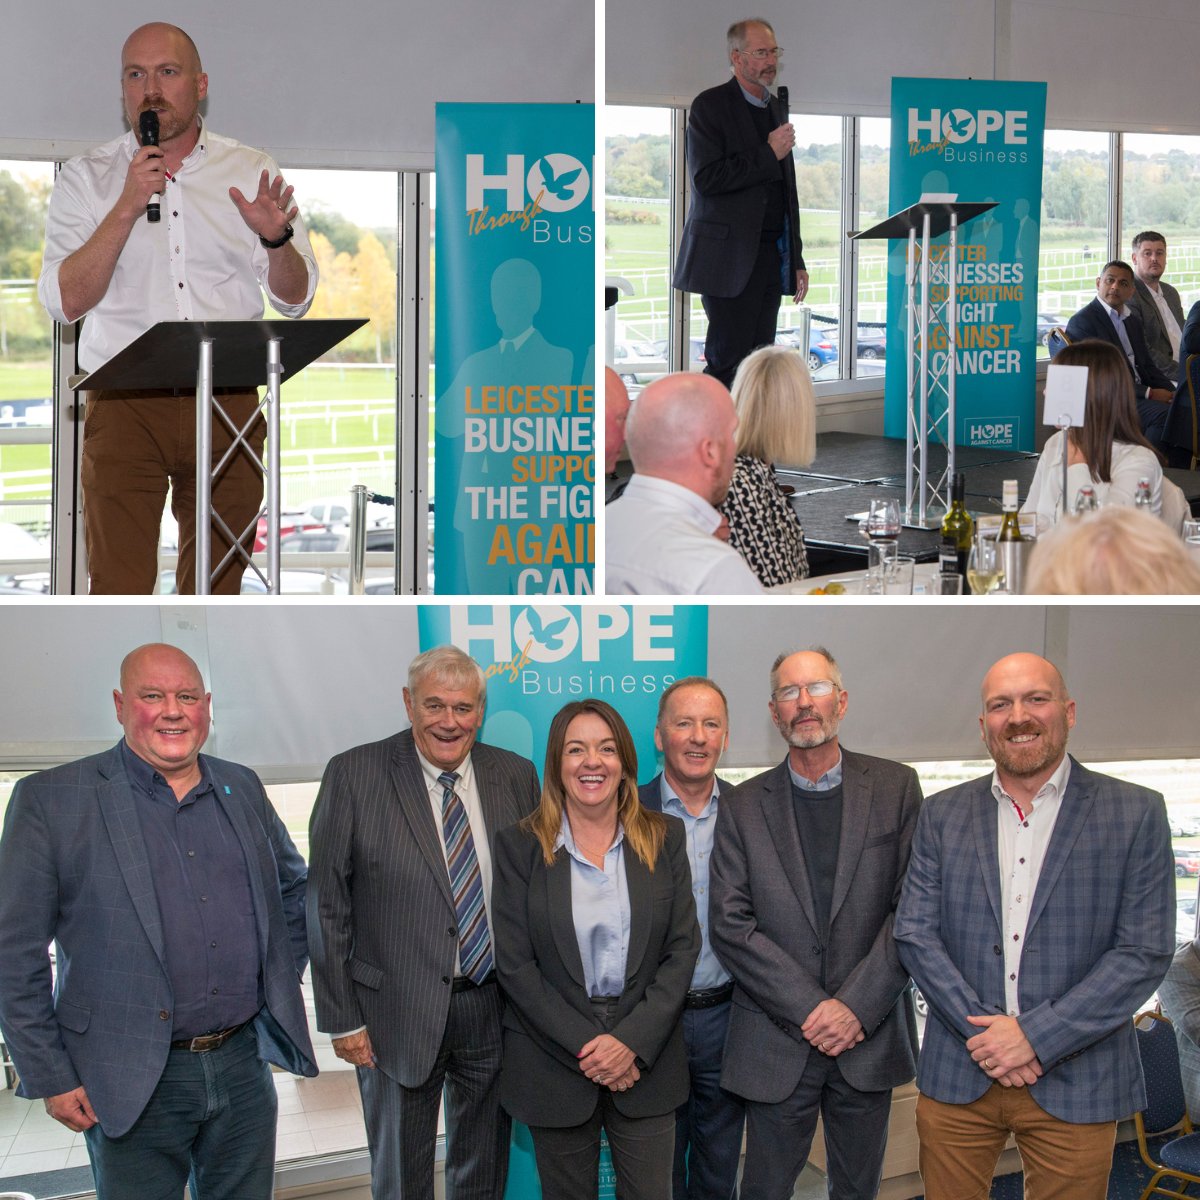 We were pleased to attend the #hopethroughbusiness lunch at the @LeicesterRaces with @hopeagnstcancer last week. It was fantastic to hear from guest speakers Chris Cain, David Guttery and Howard Ludbrook. #hopeagainstcancer #EastMidlands #CancerResearch